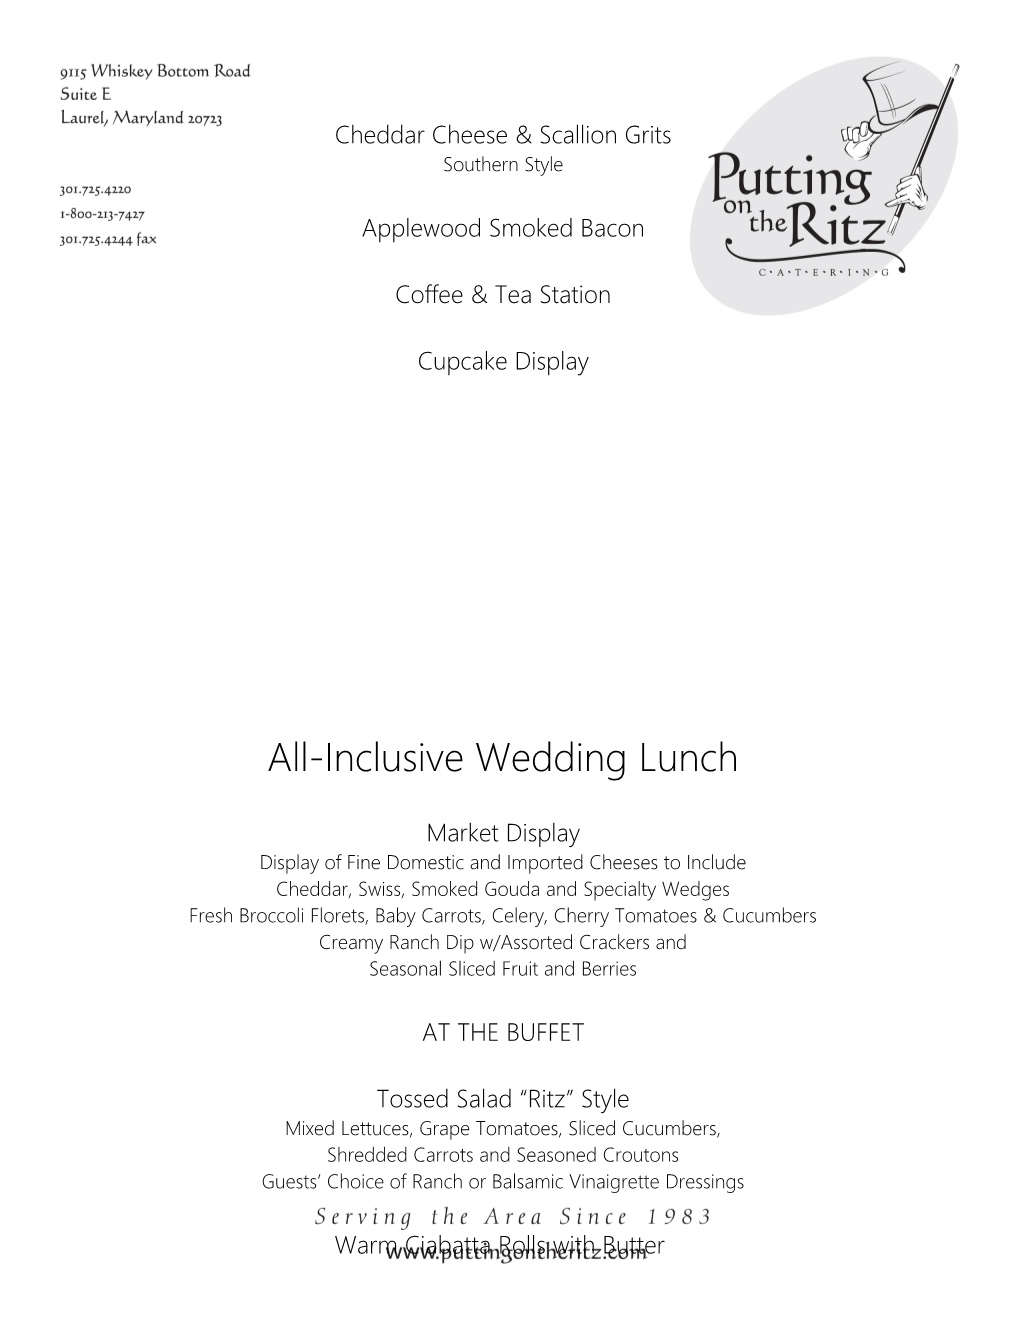 All-Inclusive Wedding Brunch Or Lunch Packages